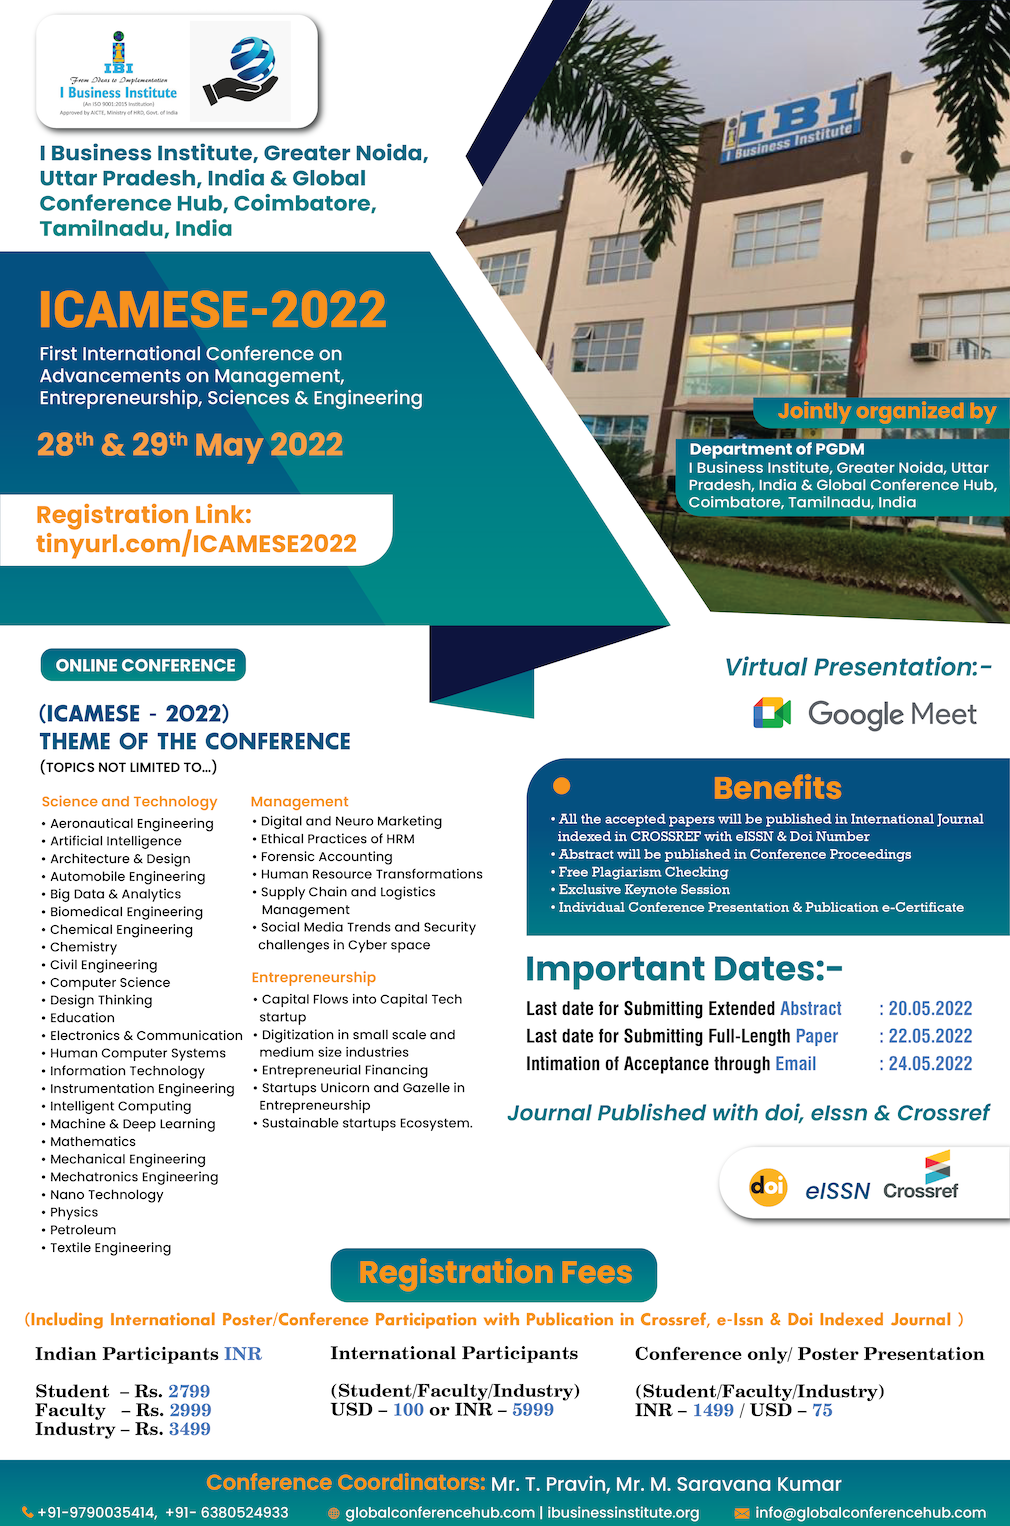 First International Conference on Advancements in Management, Entrepreneurship, Sciences and Engineering ICAMESE-2022